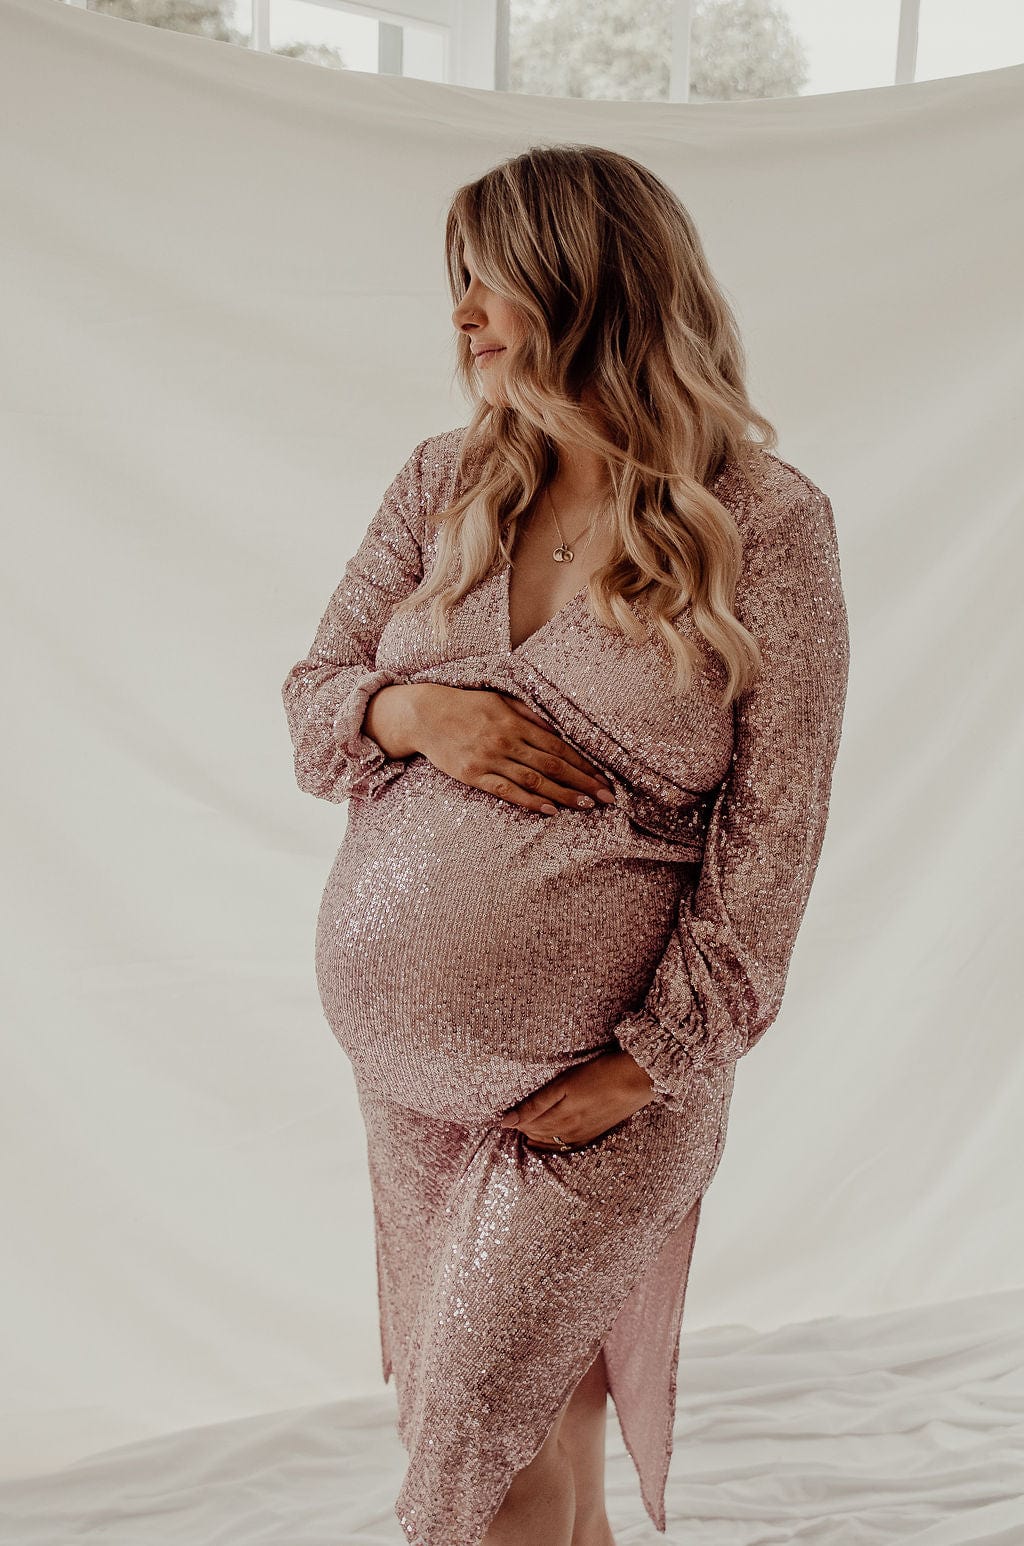 Sequin maternity photoshoot or baby shower dress